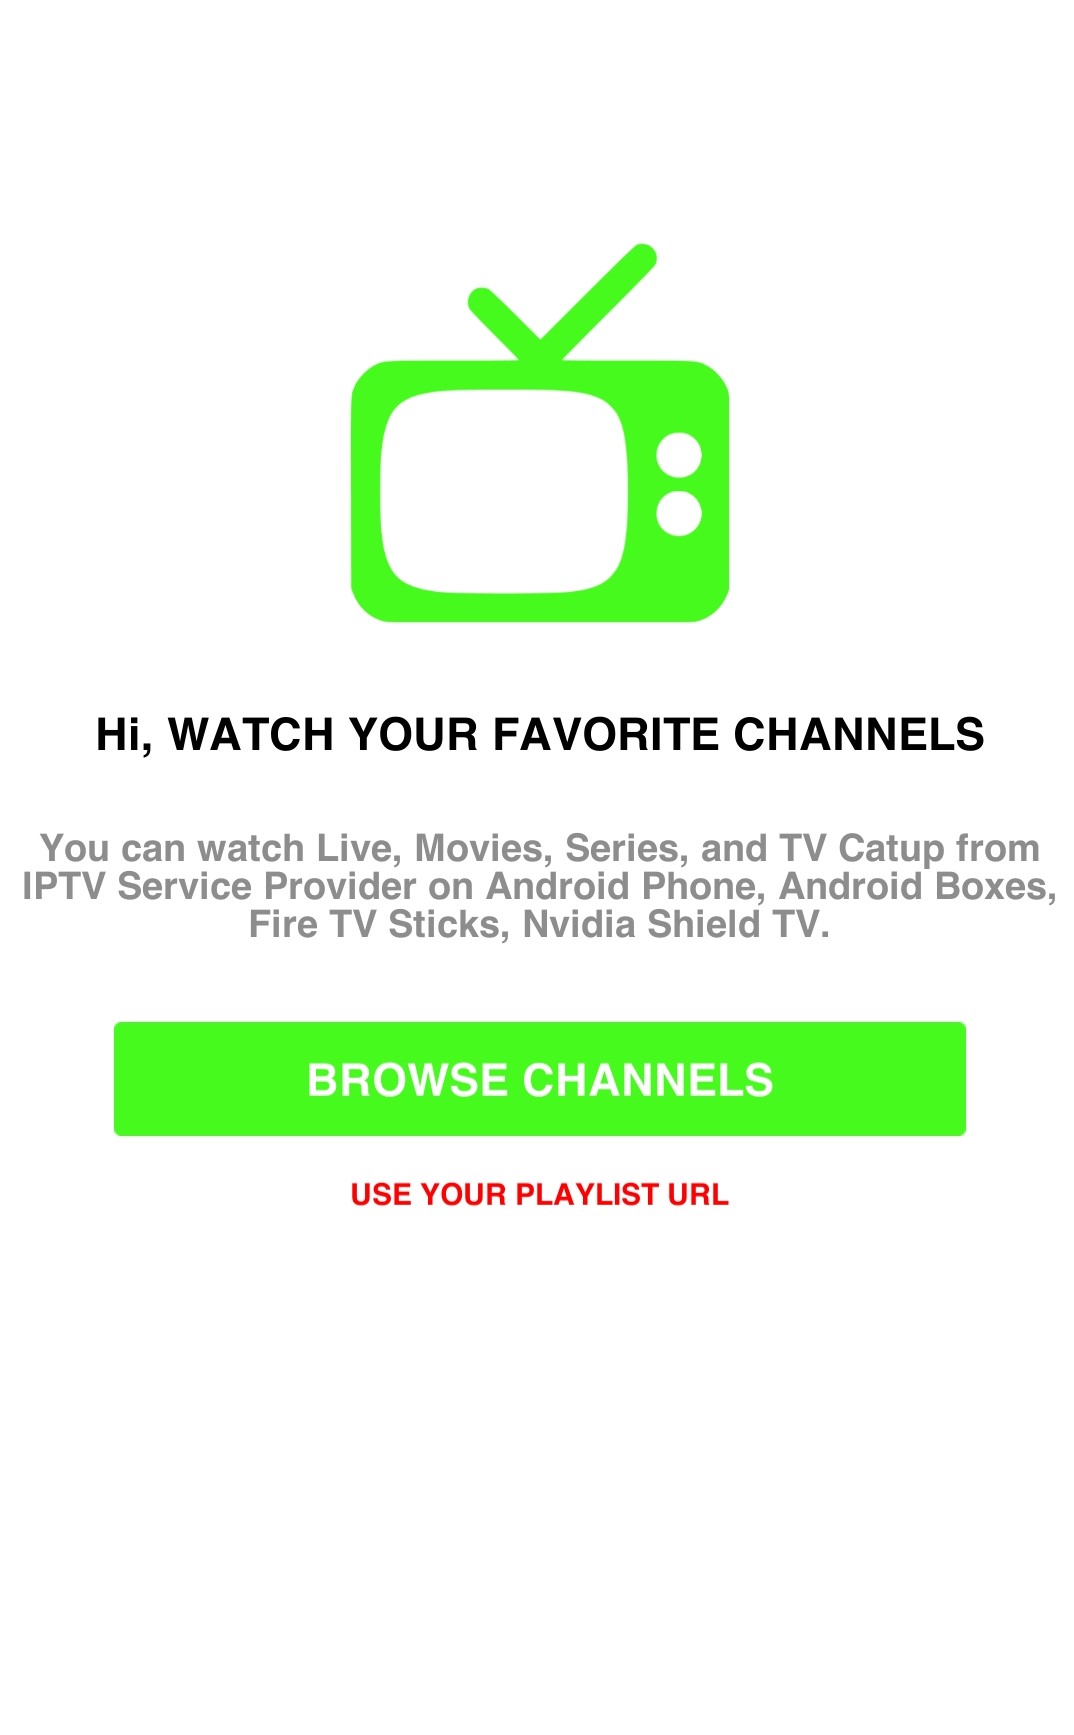 Choose Use Your Playlist URL to stream Viewsible IPTV